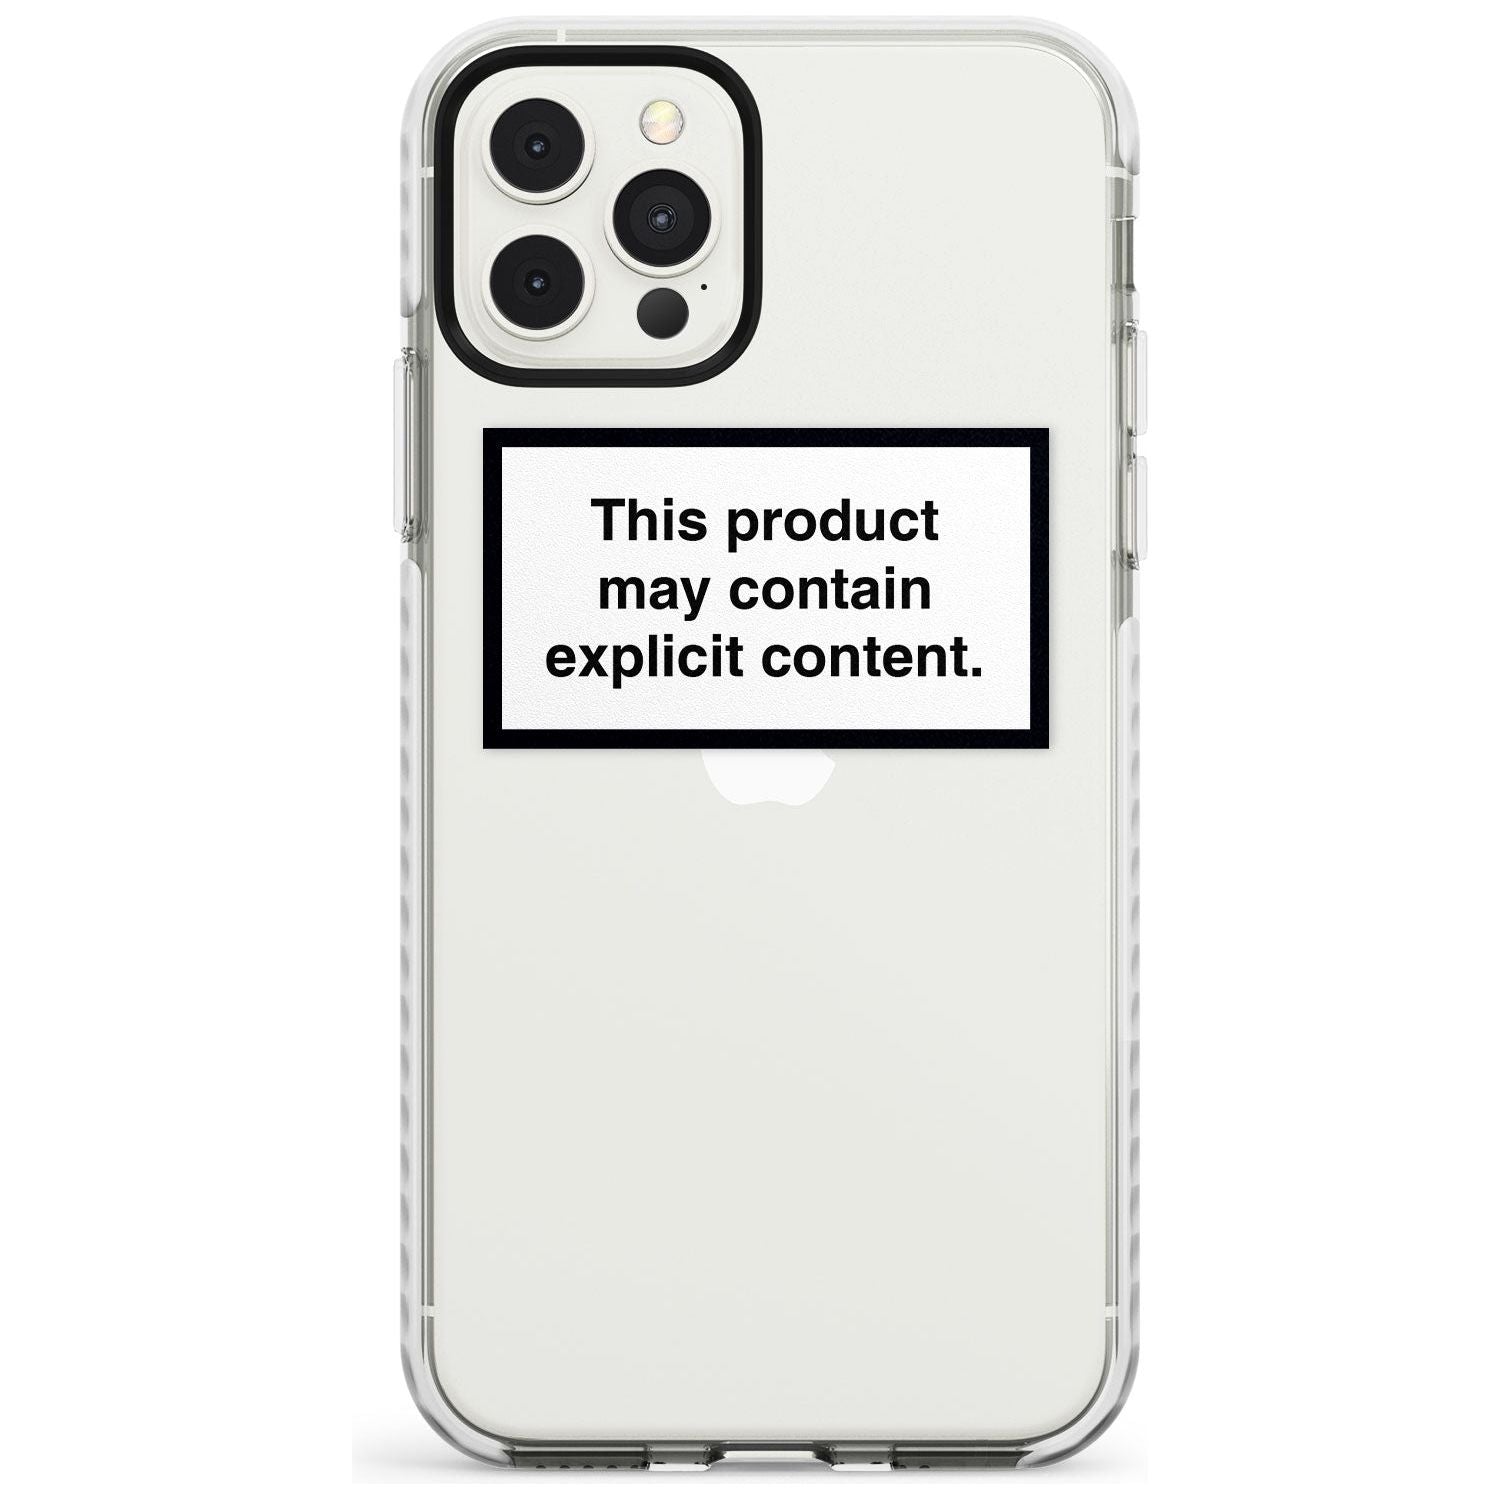 This product may contain explicit content Slim TPU Phone Case for iPhone 11 Pro Max